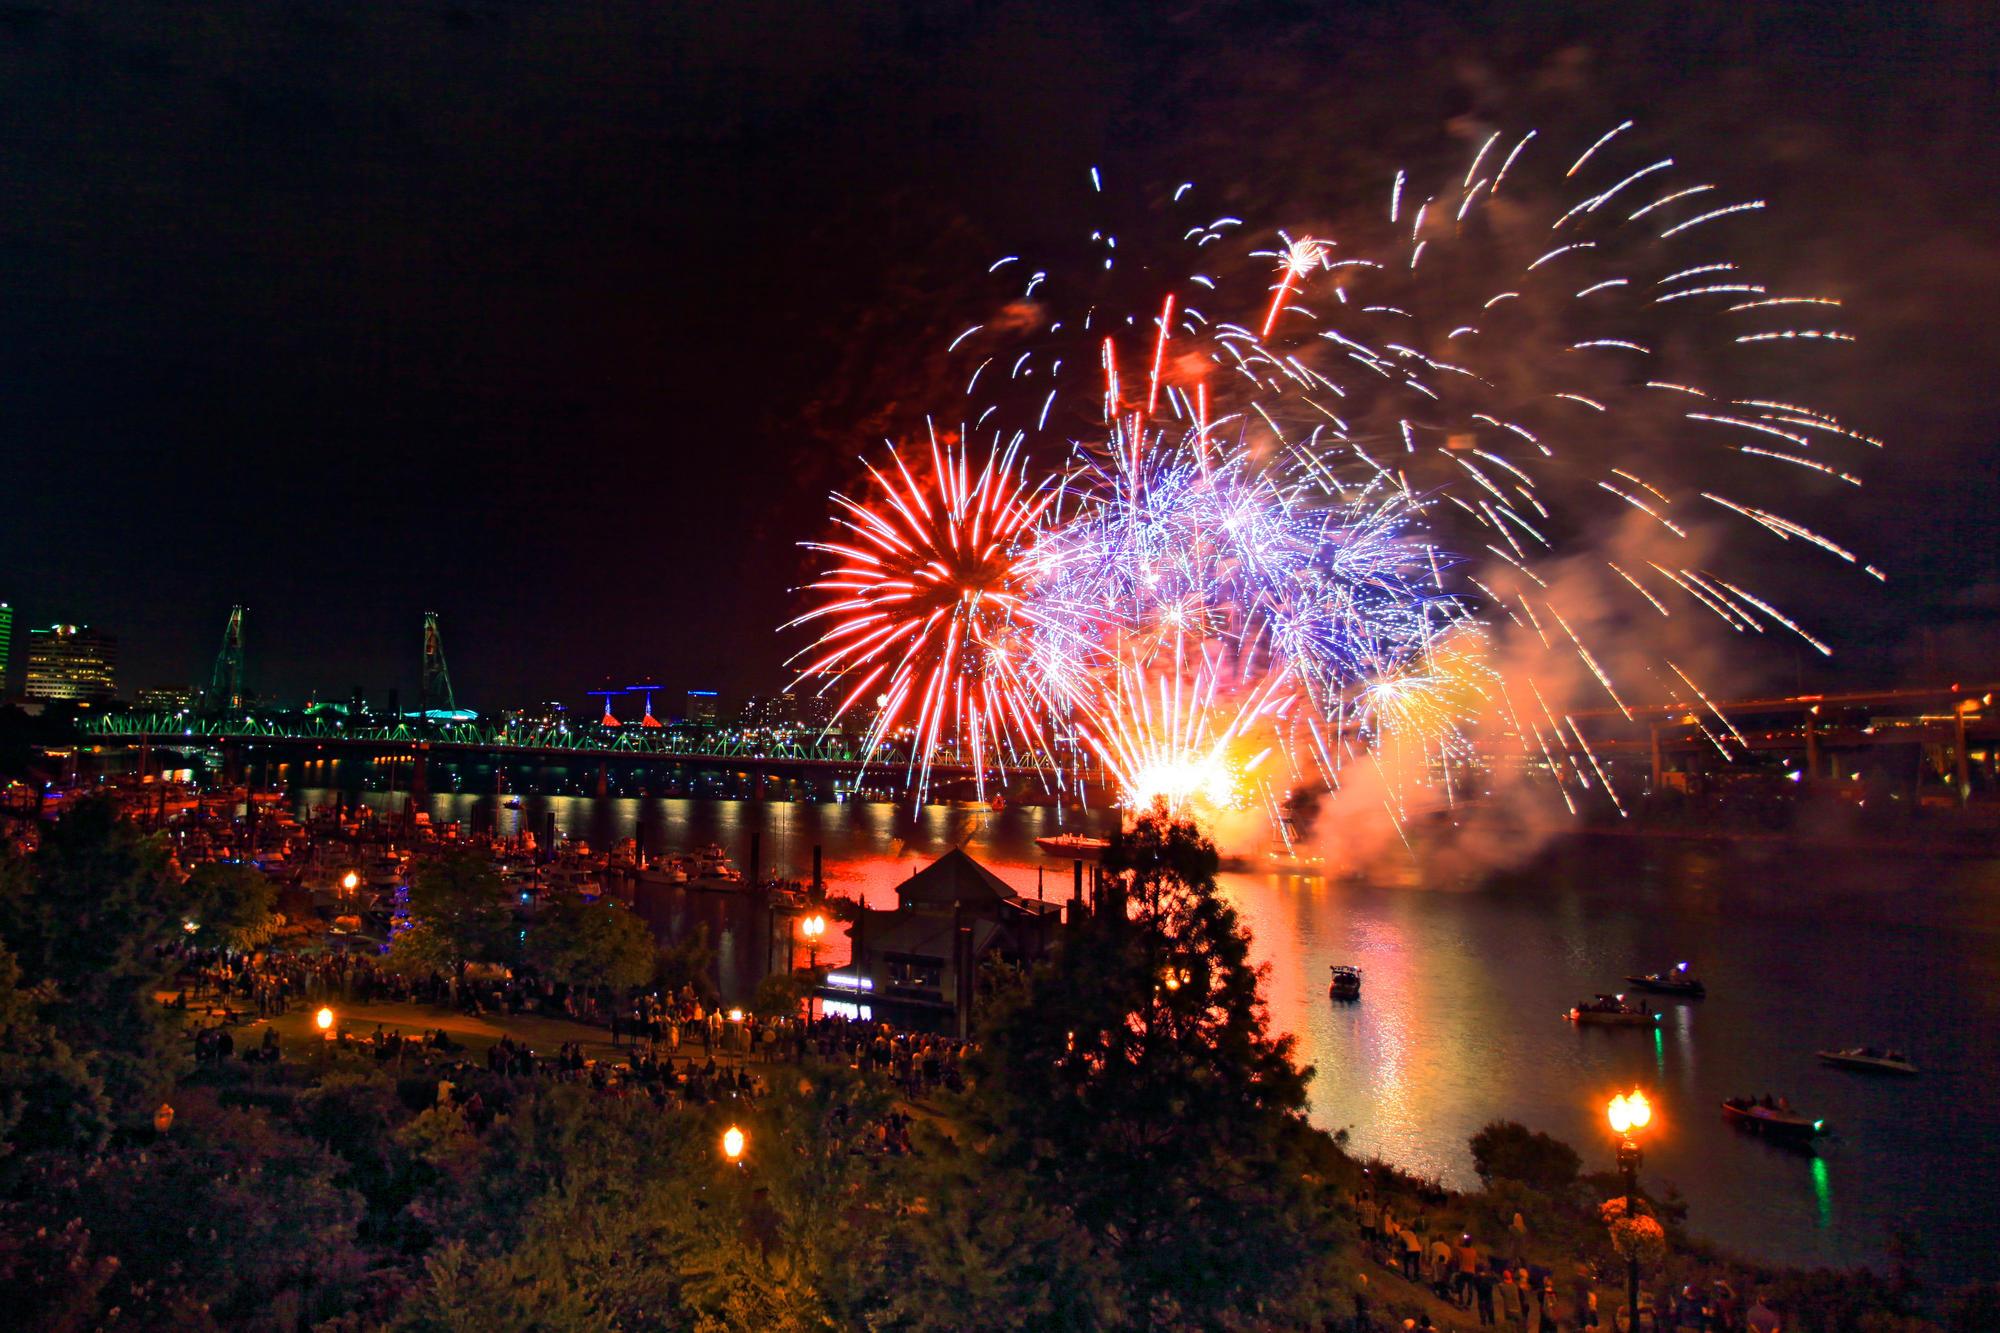 Fireworks being detonated over the waterfront in Portland, Oregon.